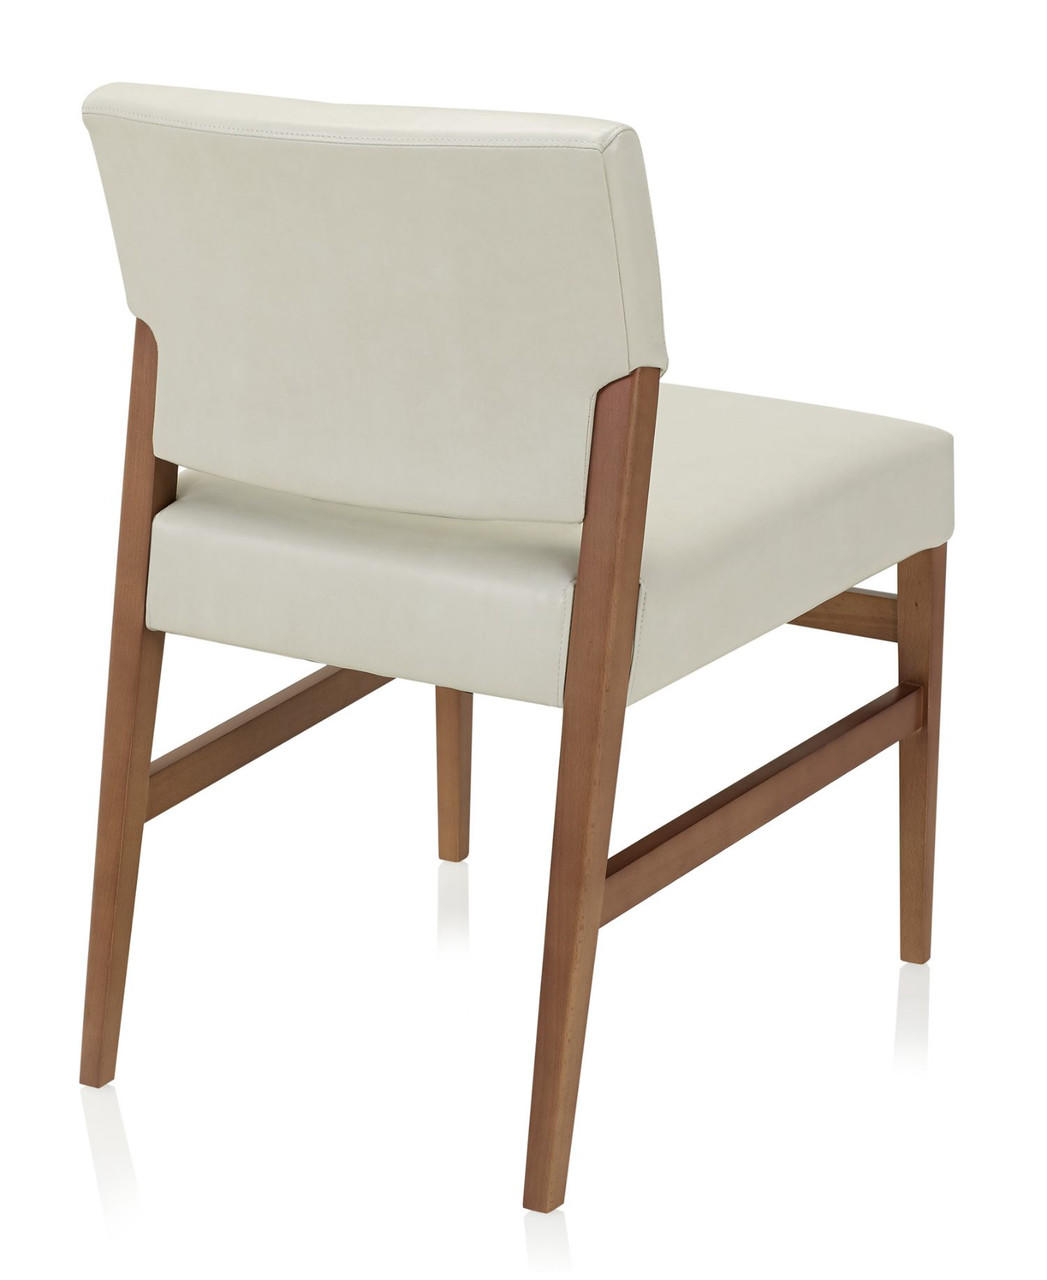 KI Furniture and Seating KI Affina Armless Leather and Wood Guest Chair 